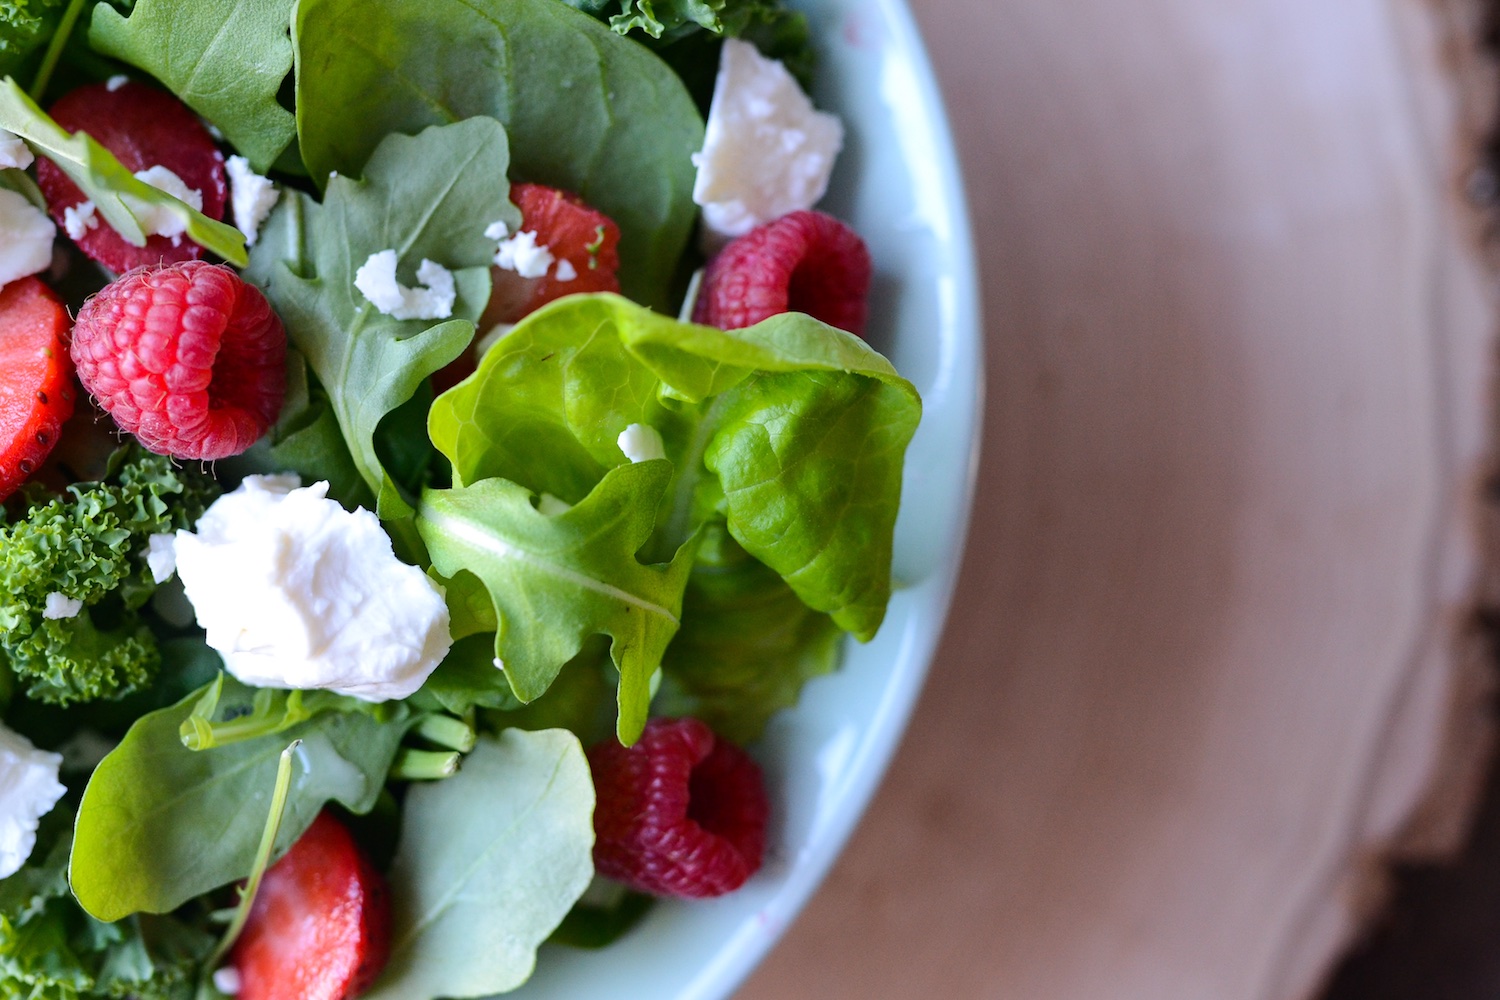 Spinach salad with kale with feta, strawberries and raspberries